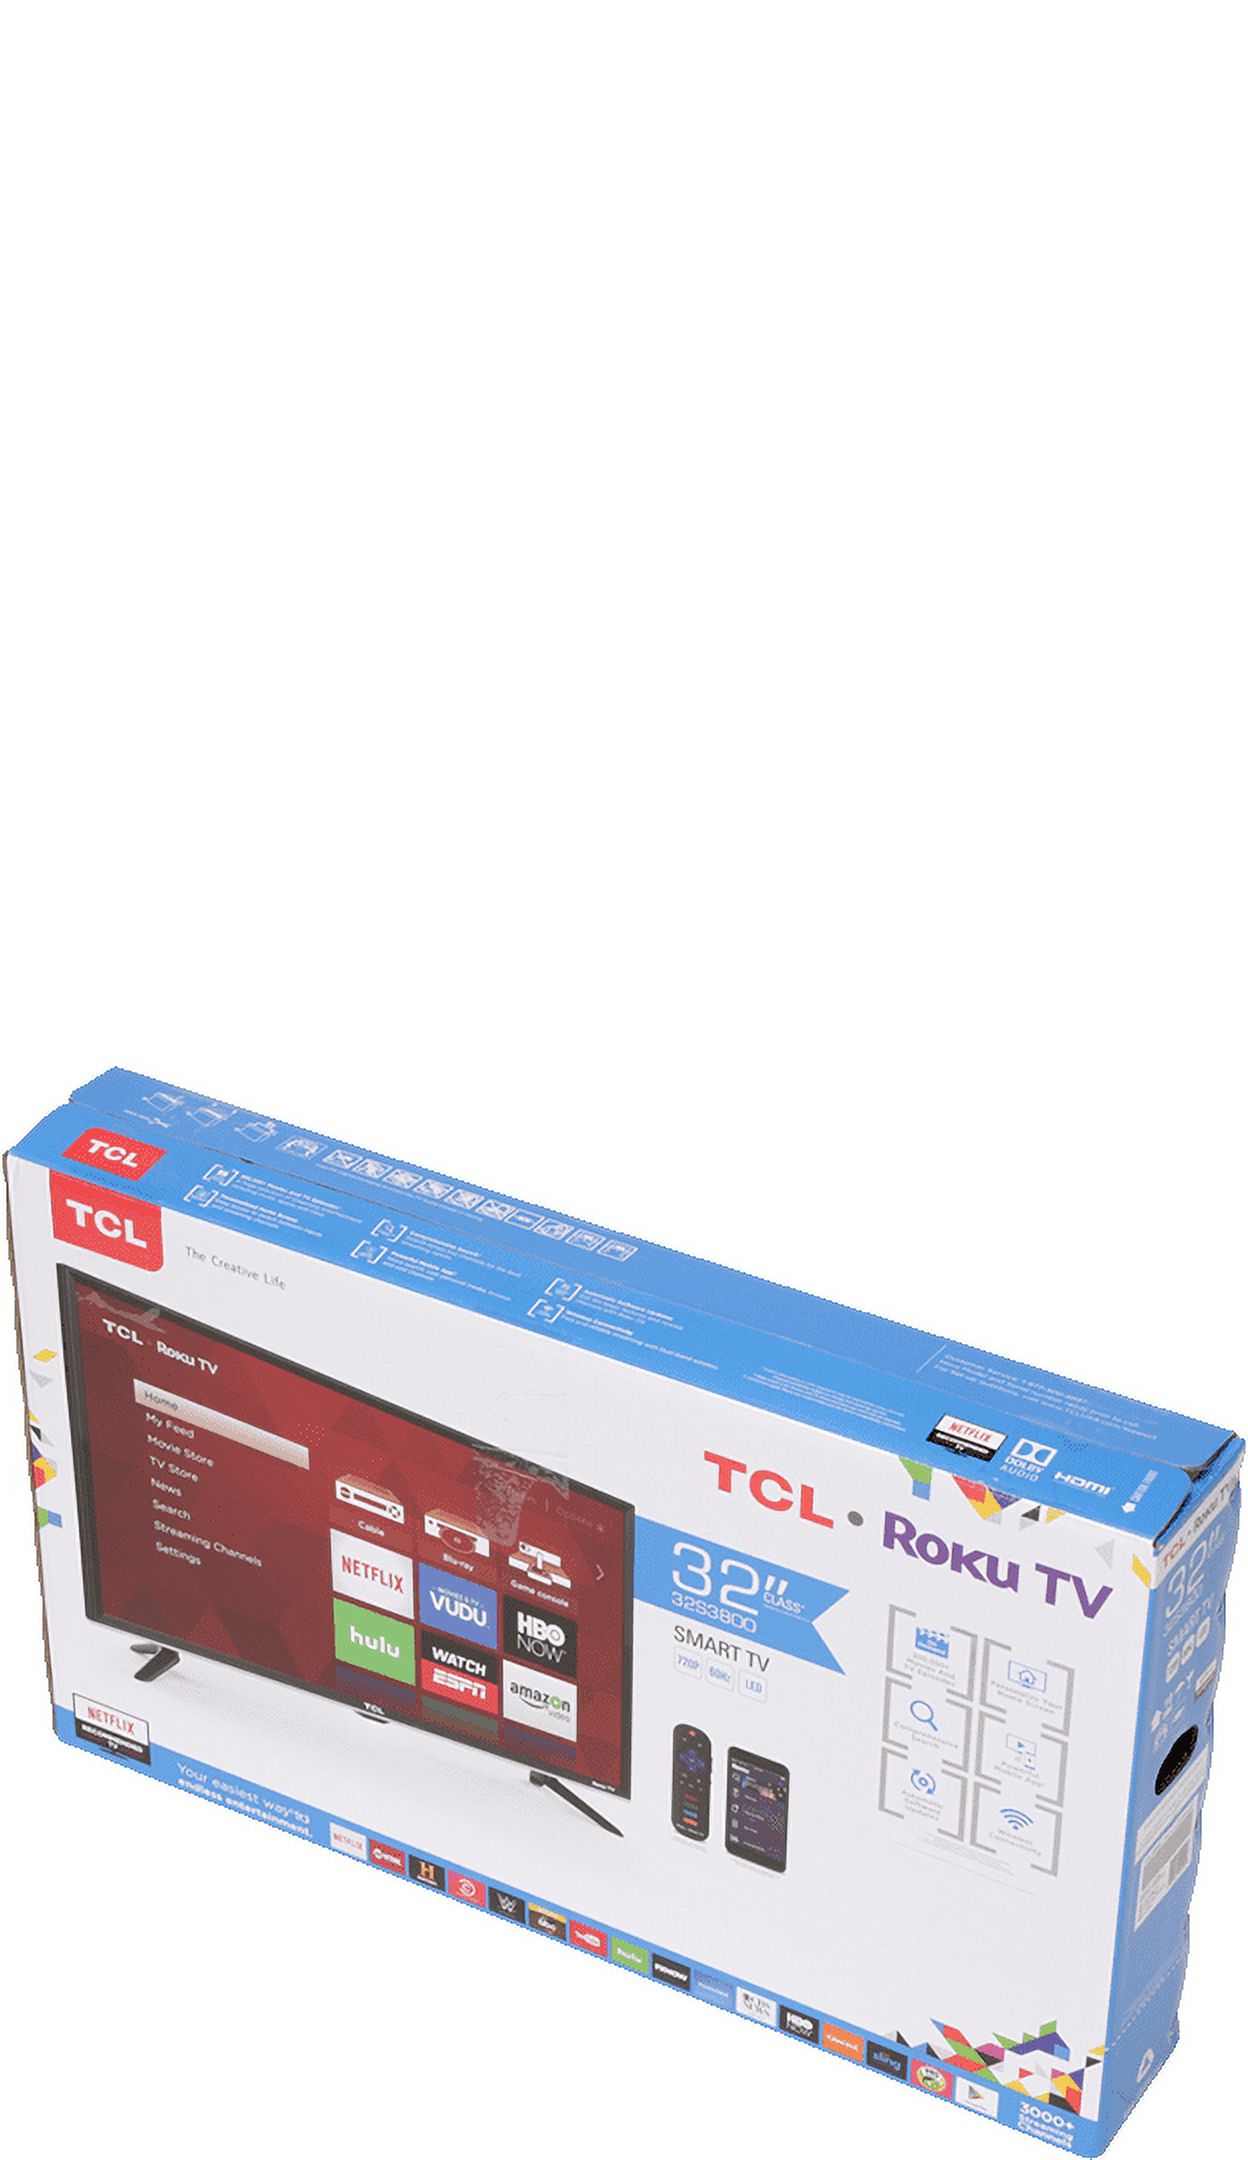 32" 720p LED TV With Roku - image 15 of 19